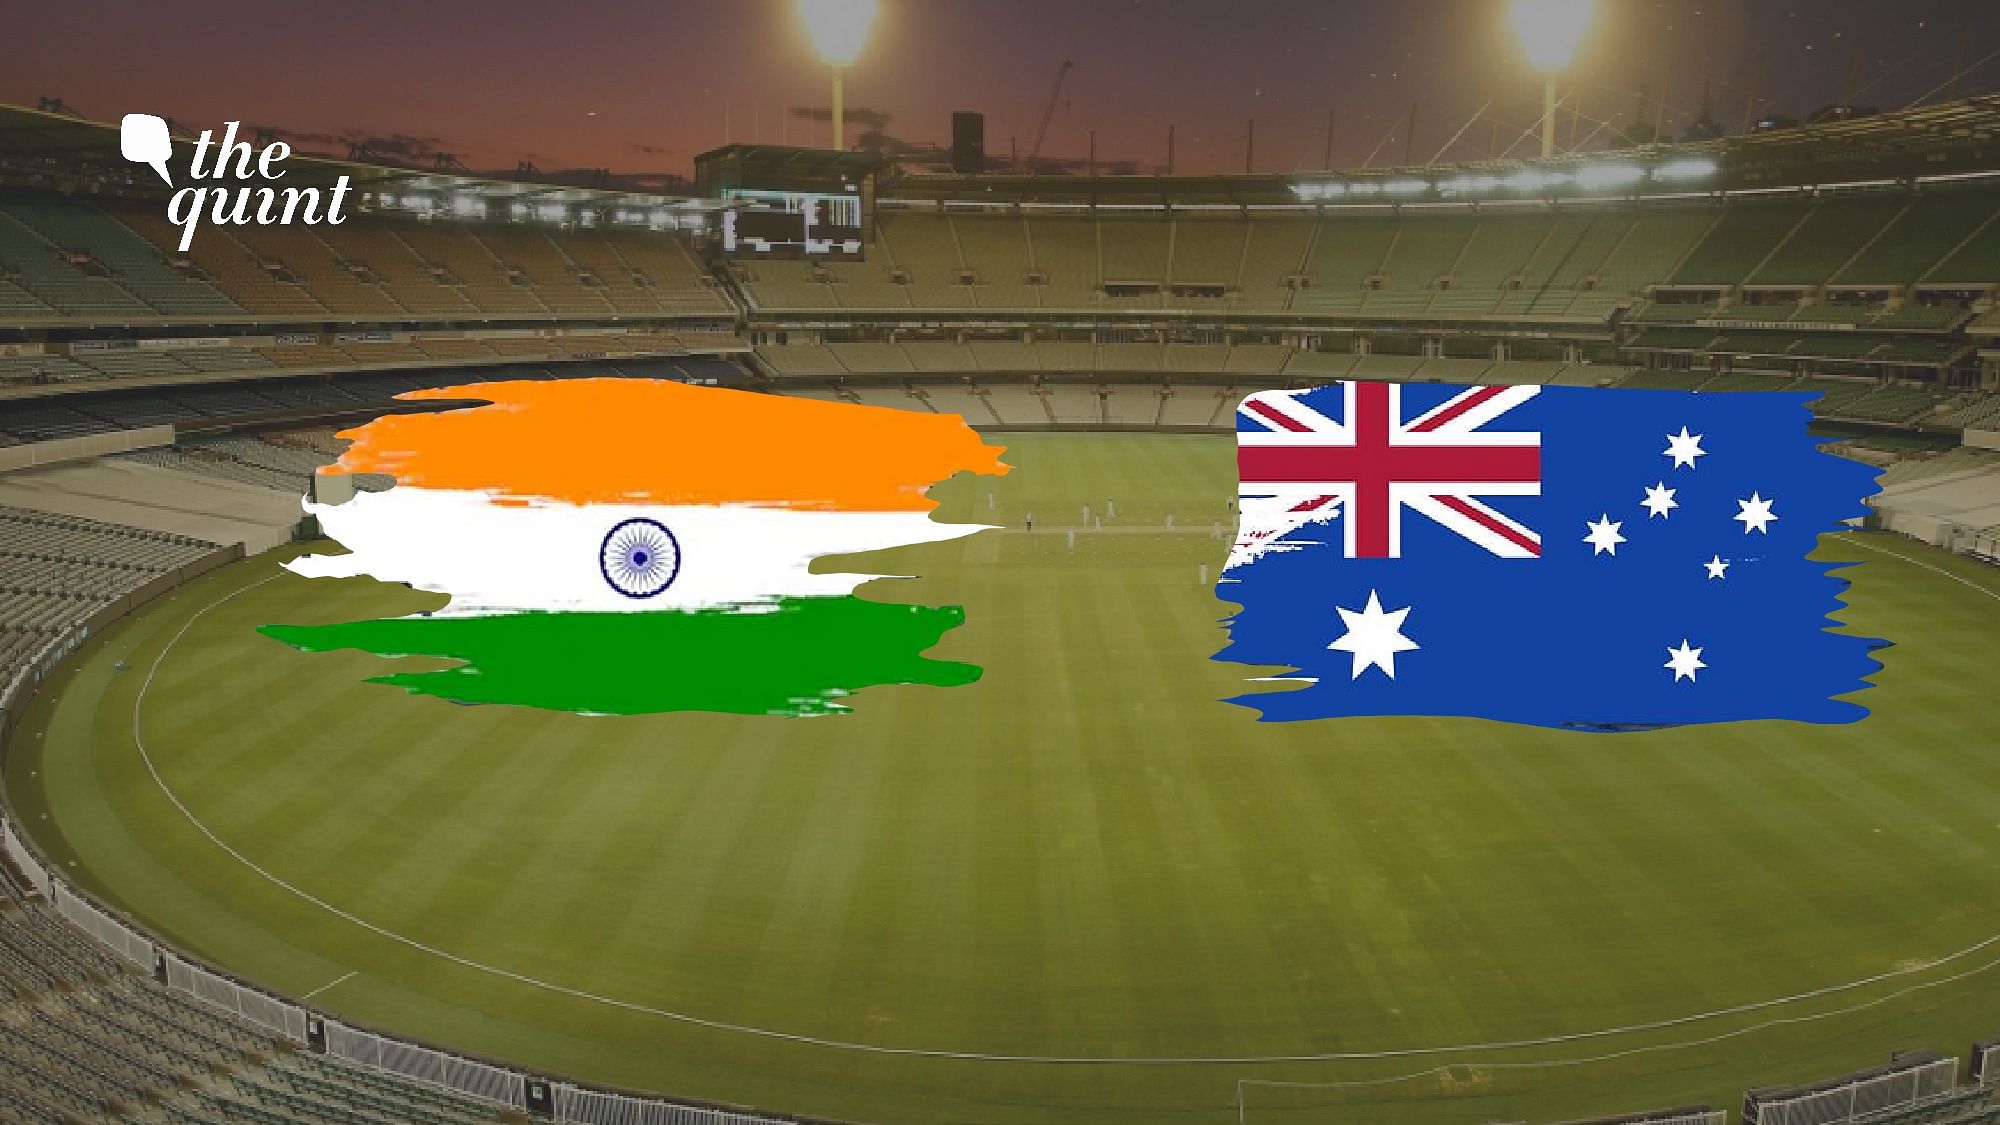 SCG test match between India and Australia was marred by instances of racism and sledging.